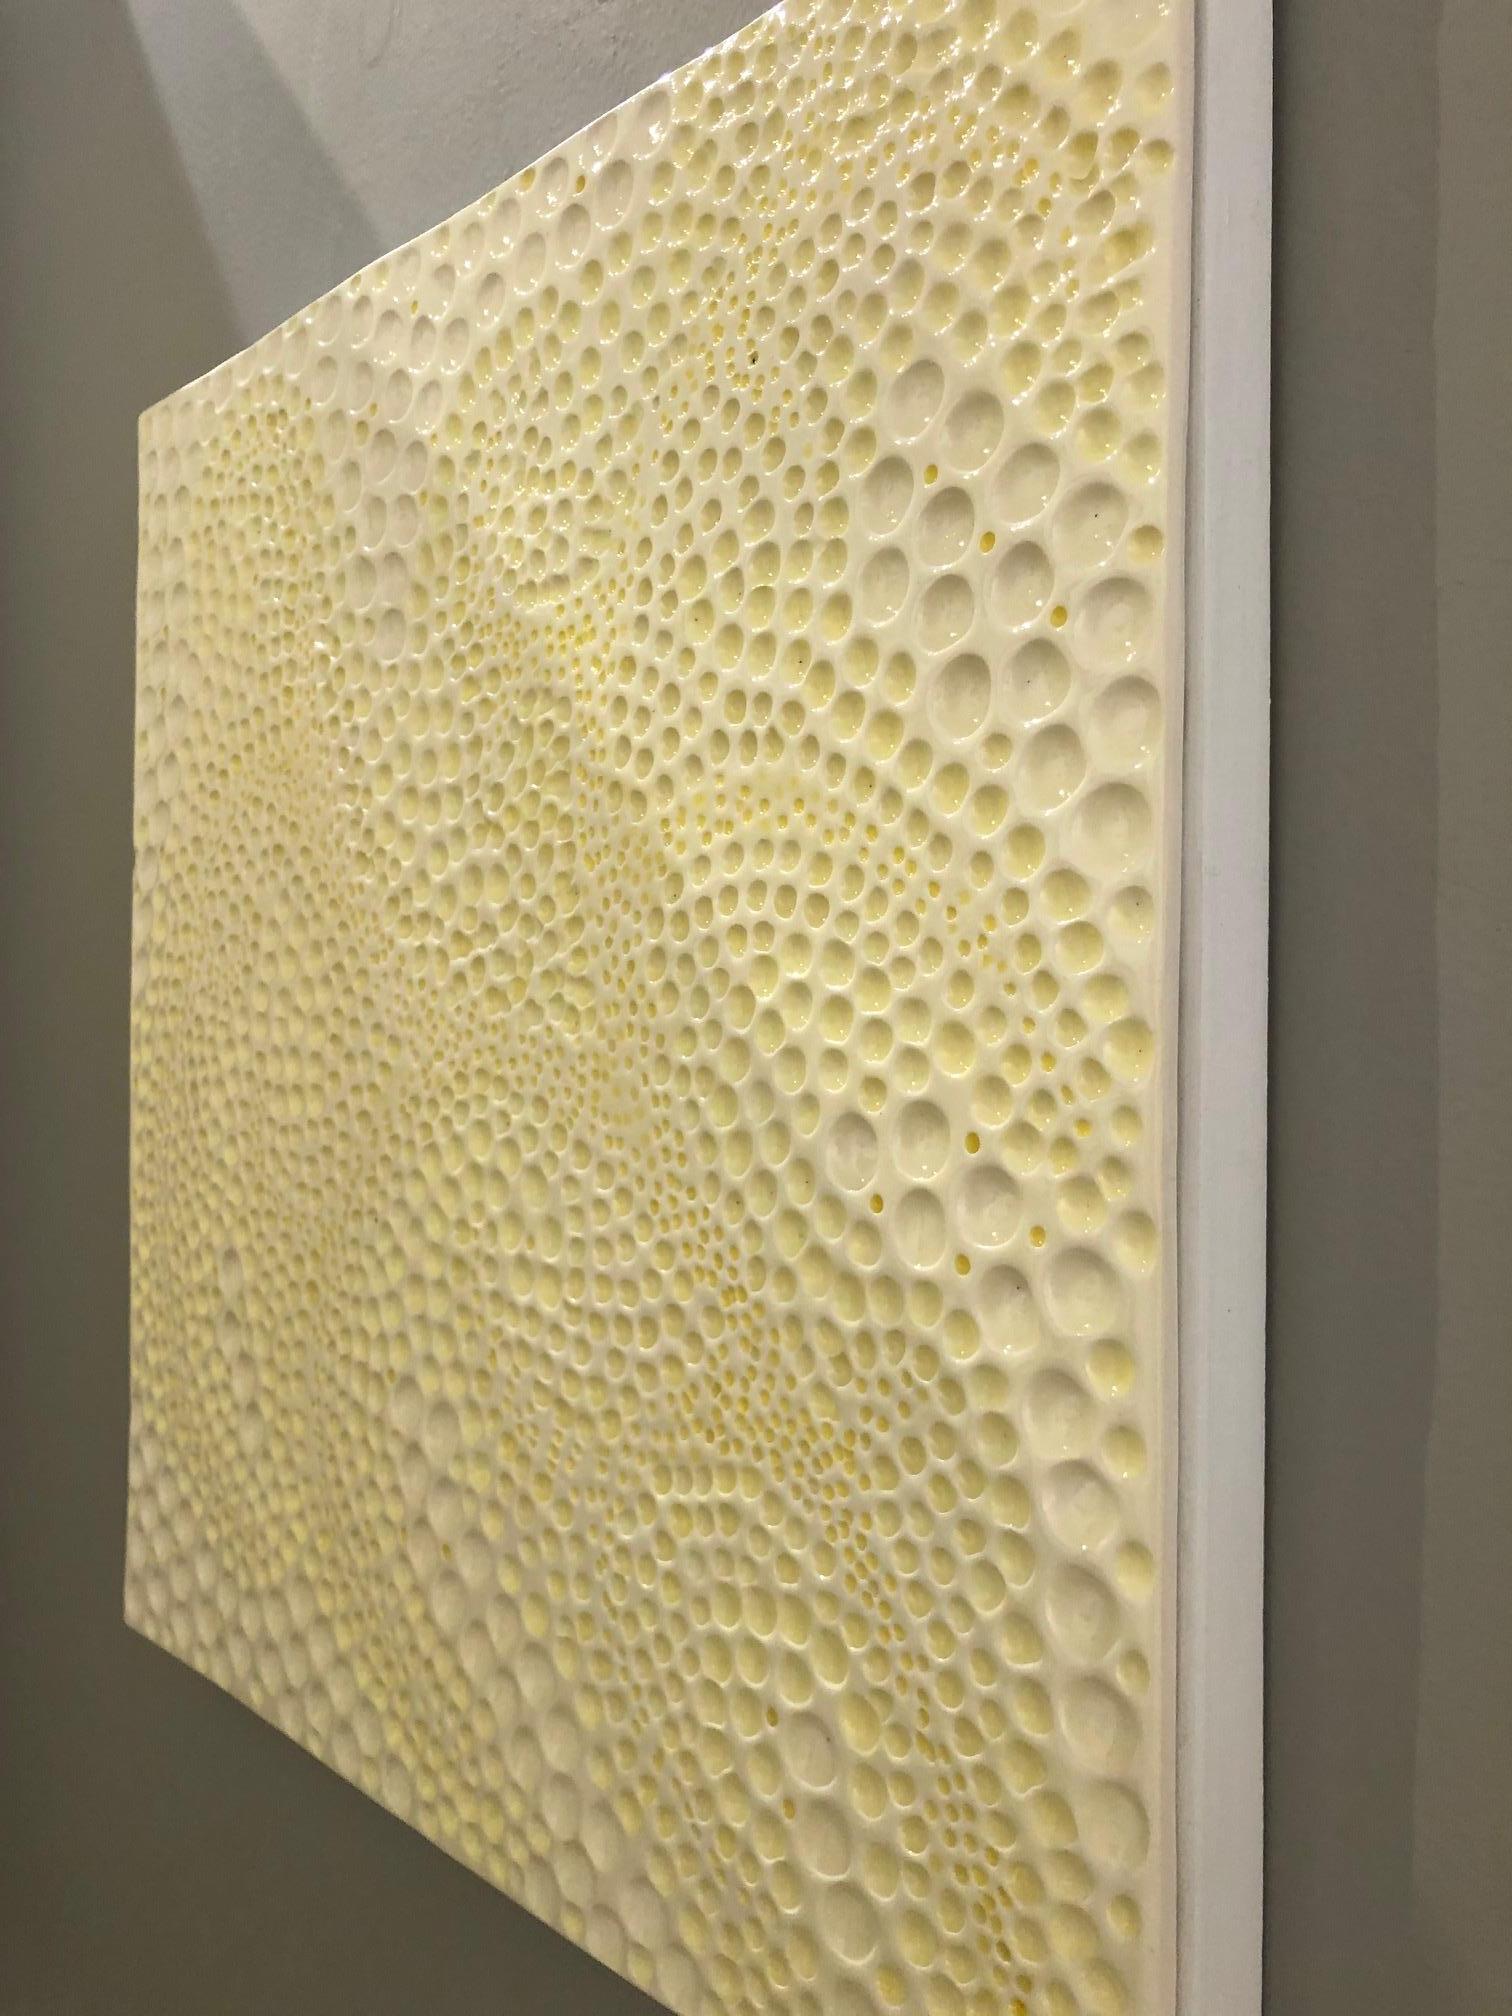 Fugue 5 / ceramic & wood wall sculpture - yellow, white, 3D  - Abstract Mixed Media Art by Jane B. Grimm